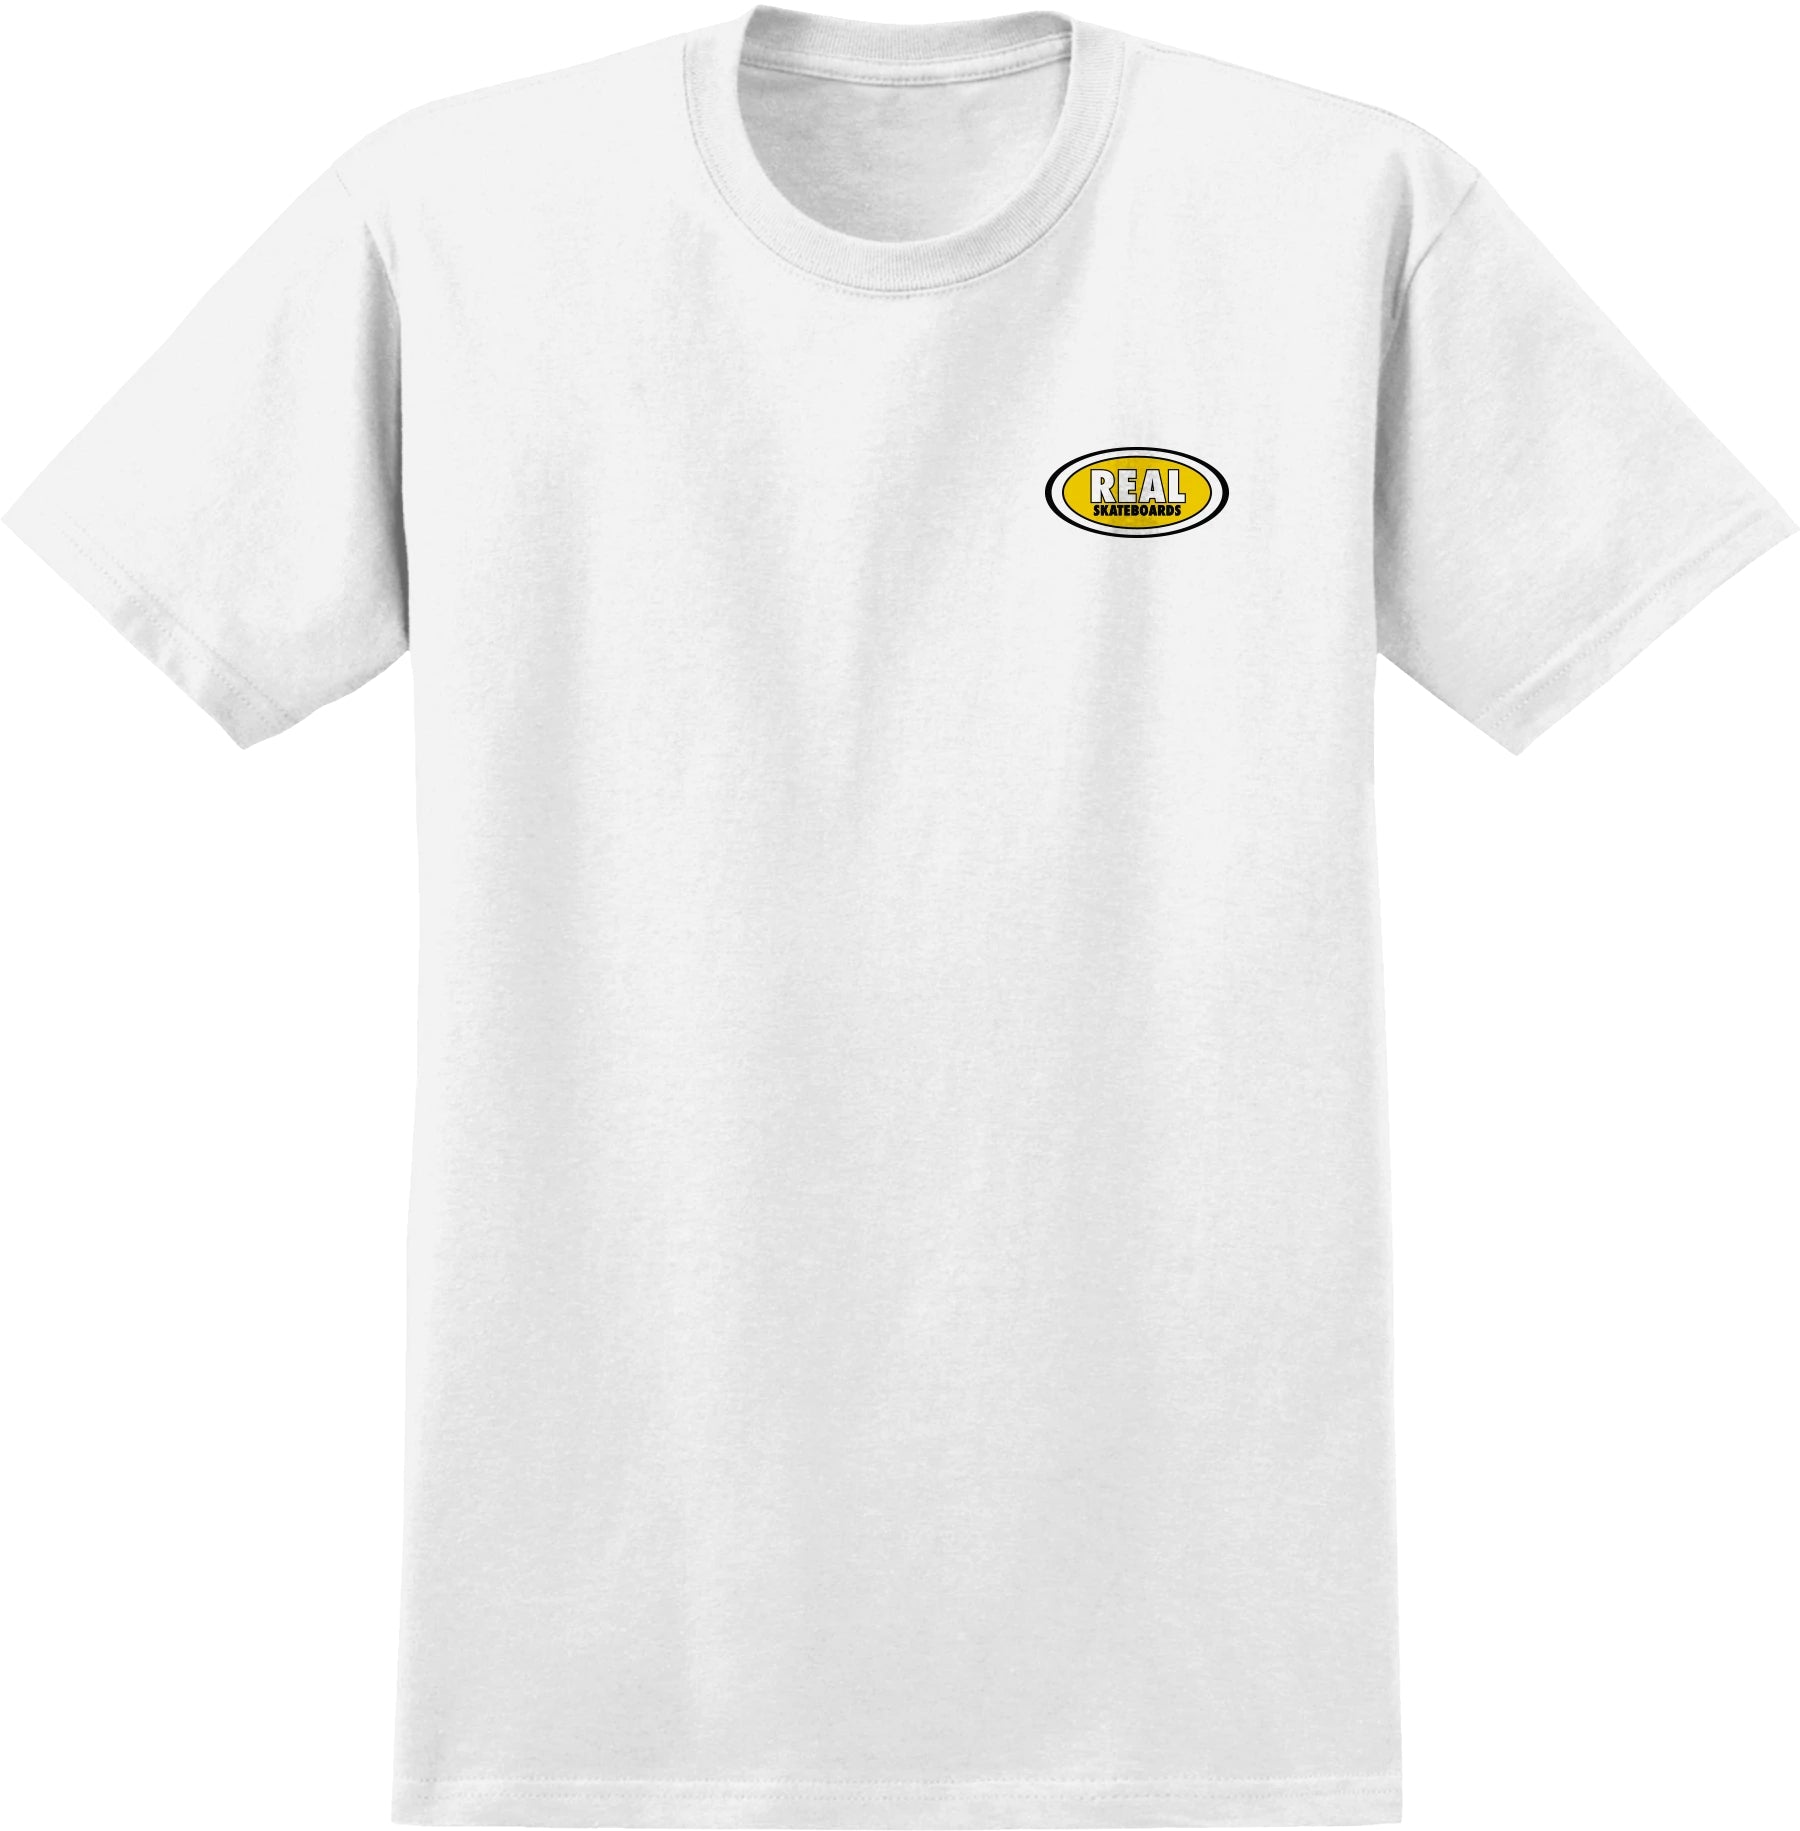 Small Oval White Real Skateboards T-Shirt